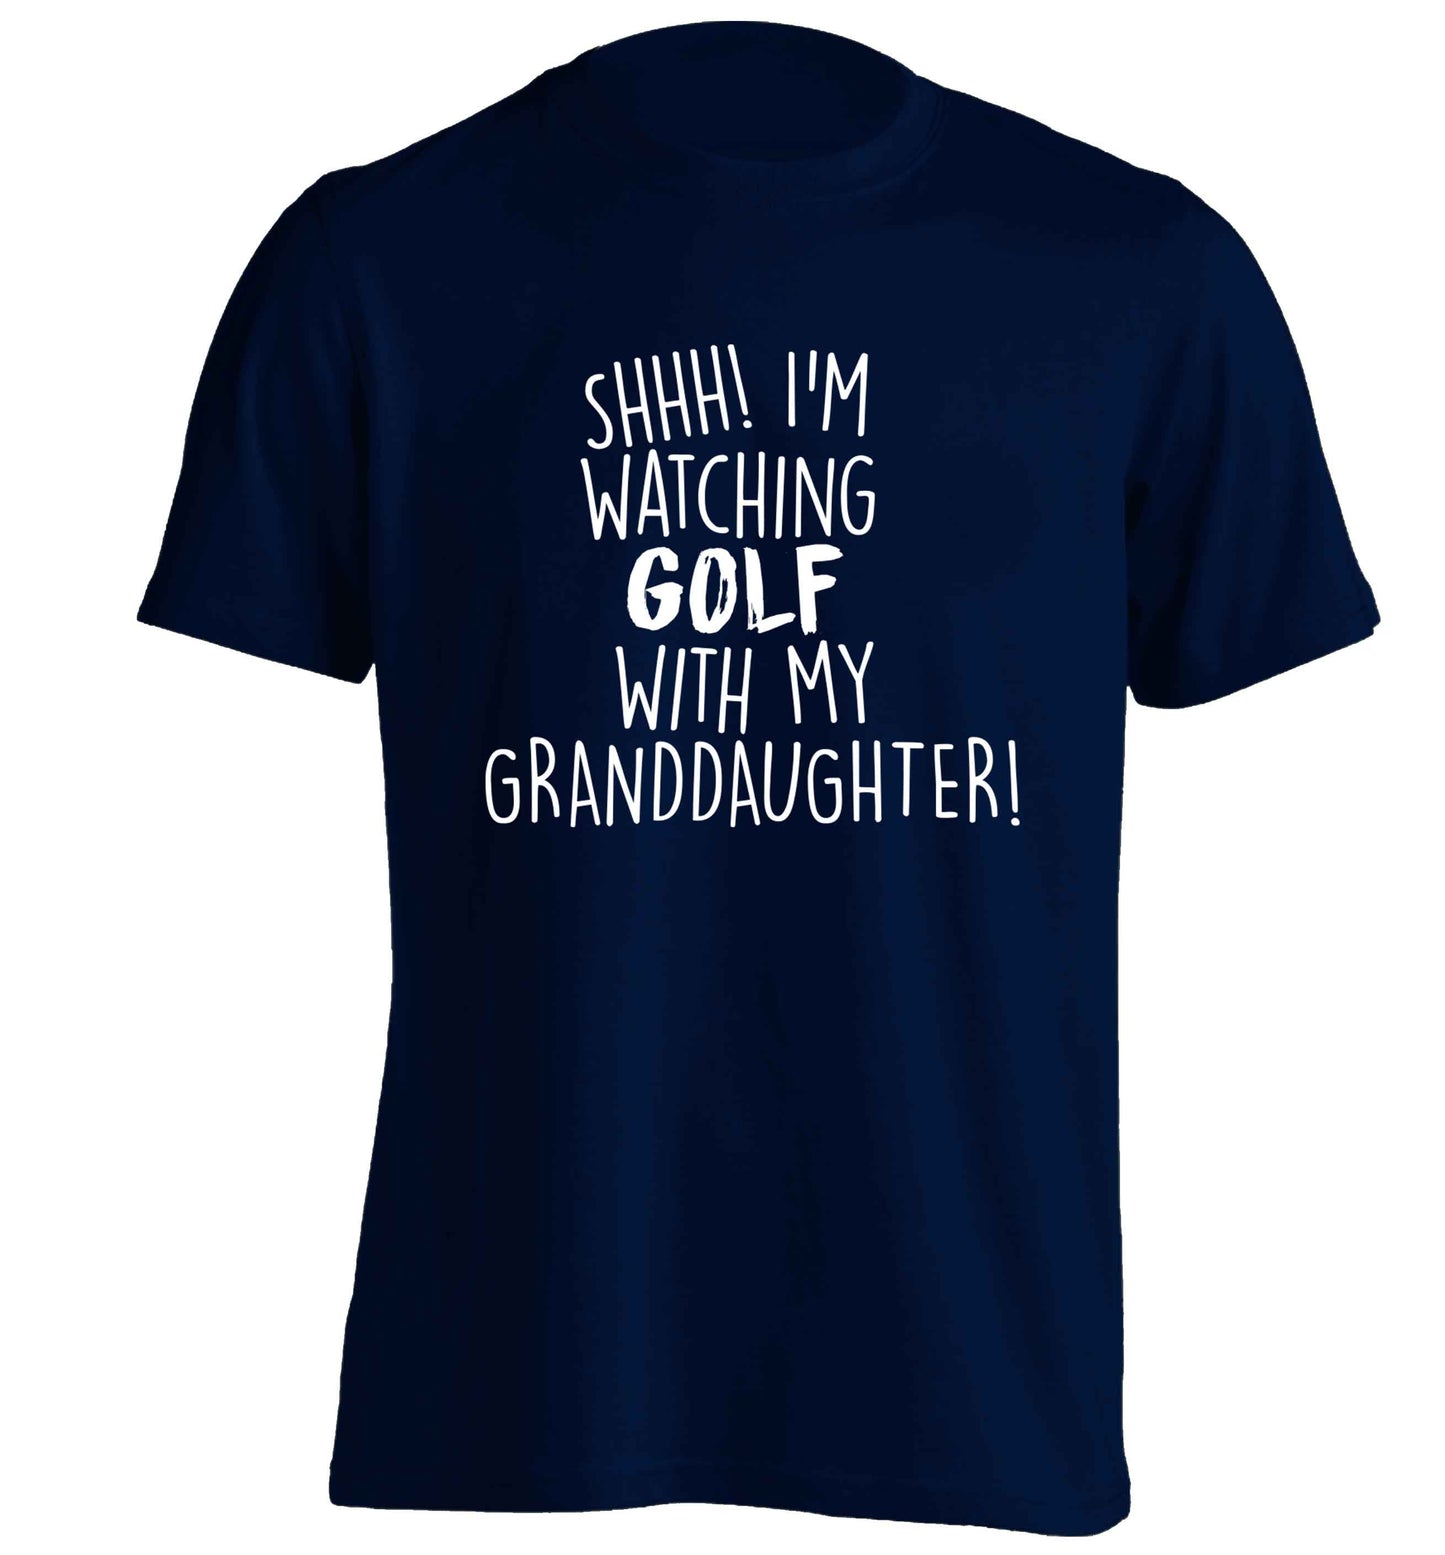 Shh I'm watching golf with my granddaughter adults unisex navy Tshirt 2XL